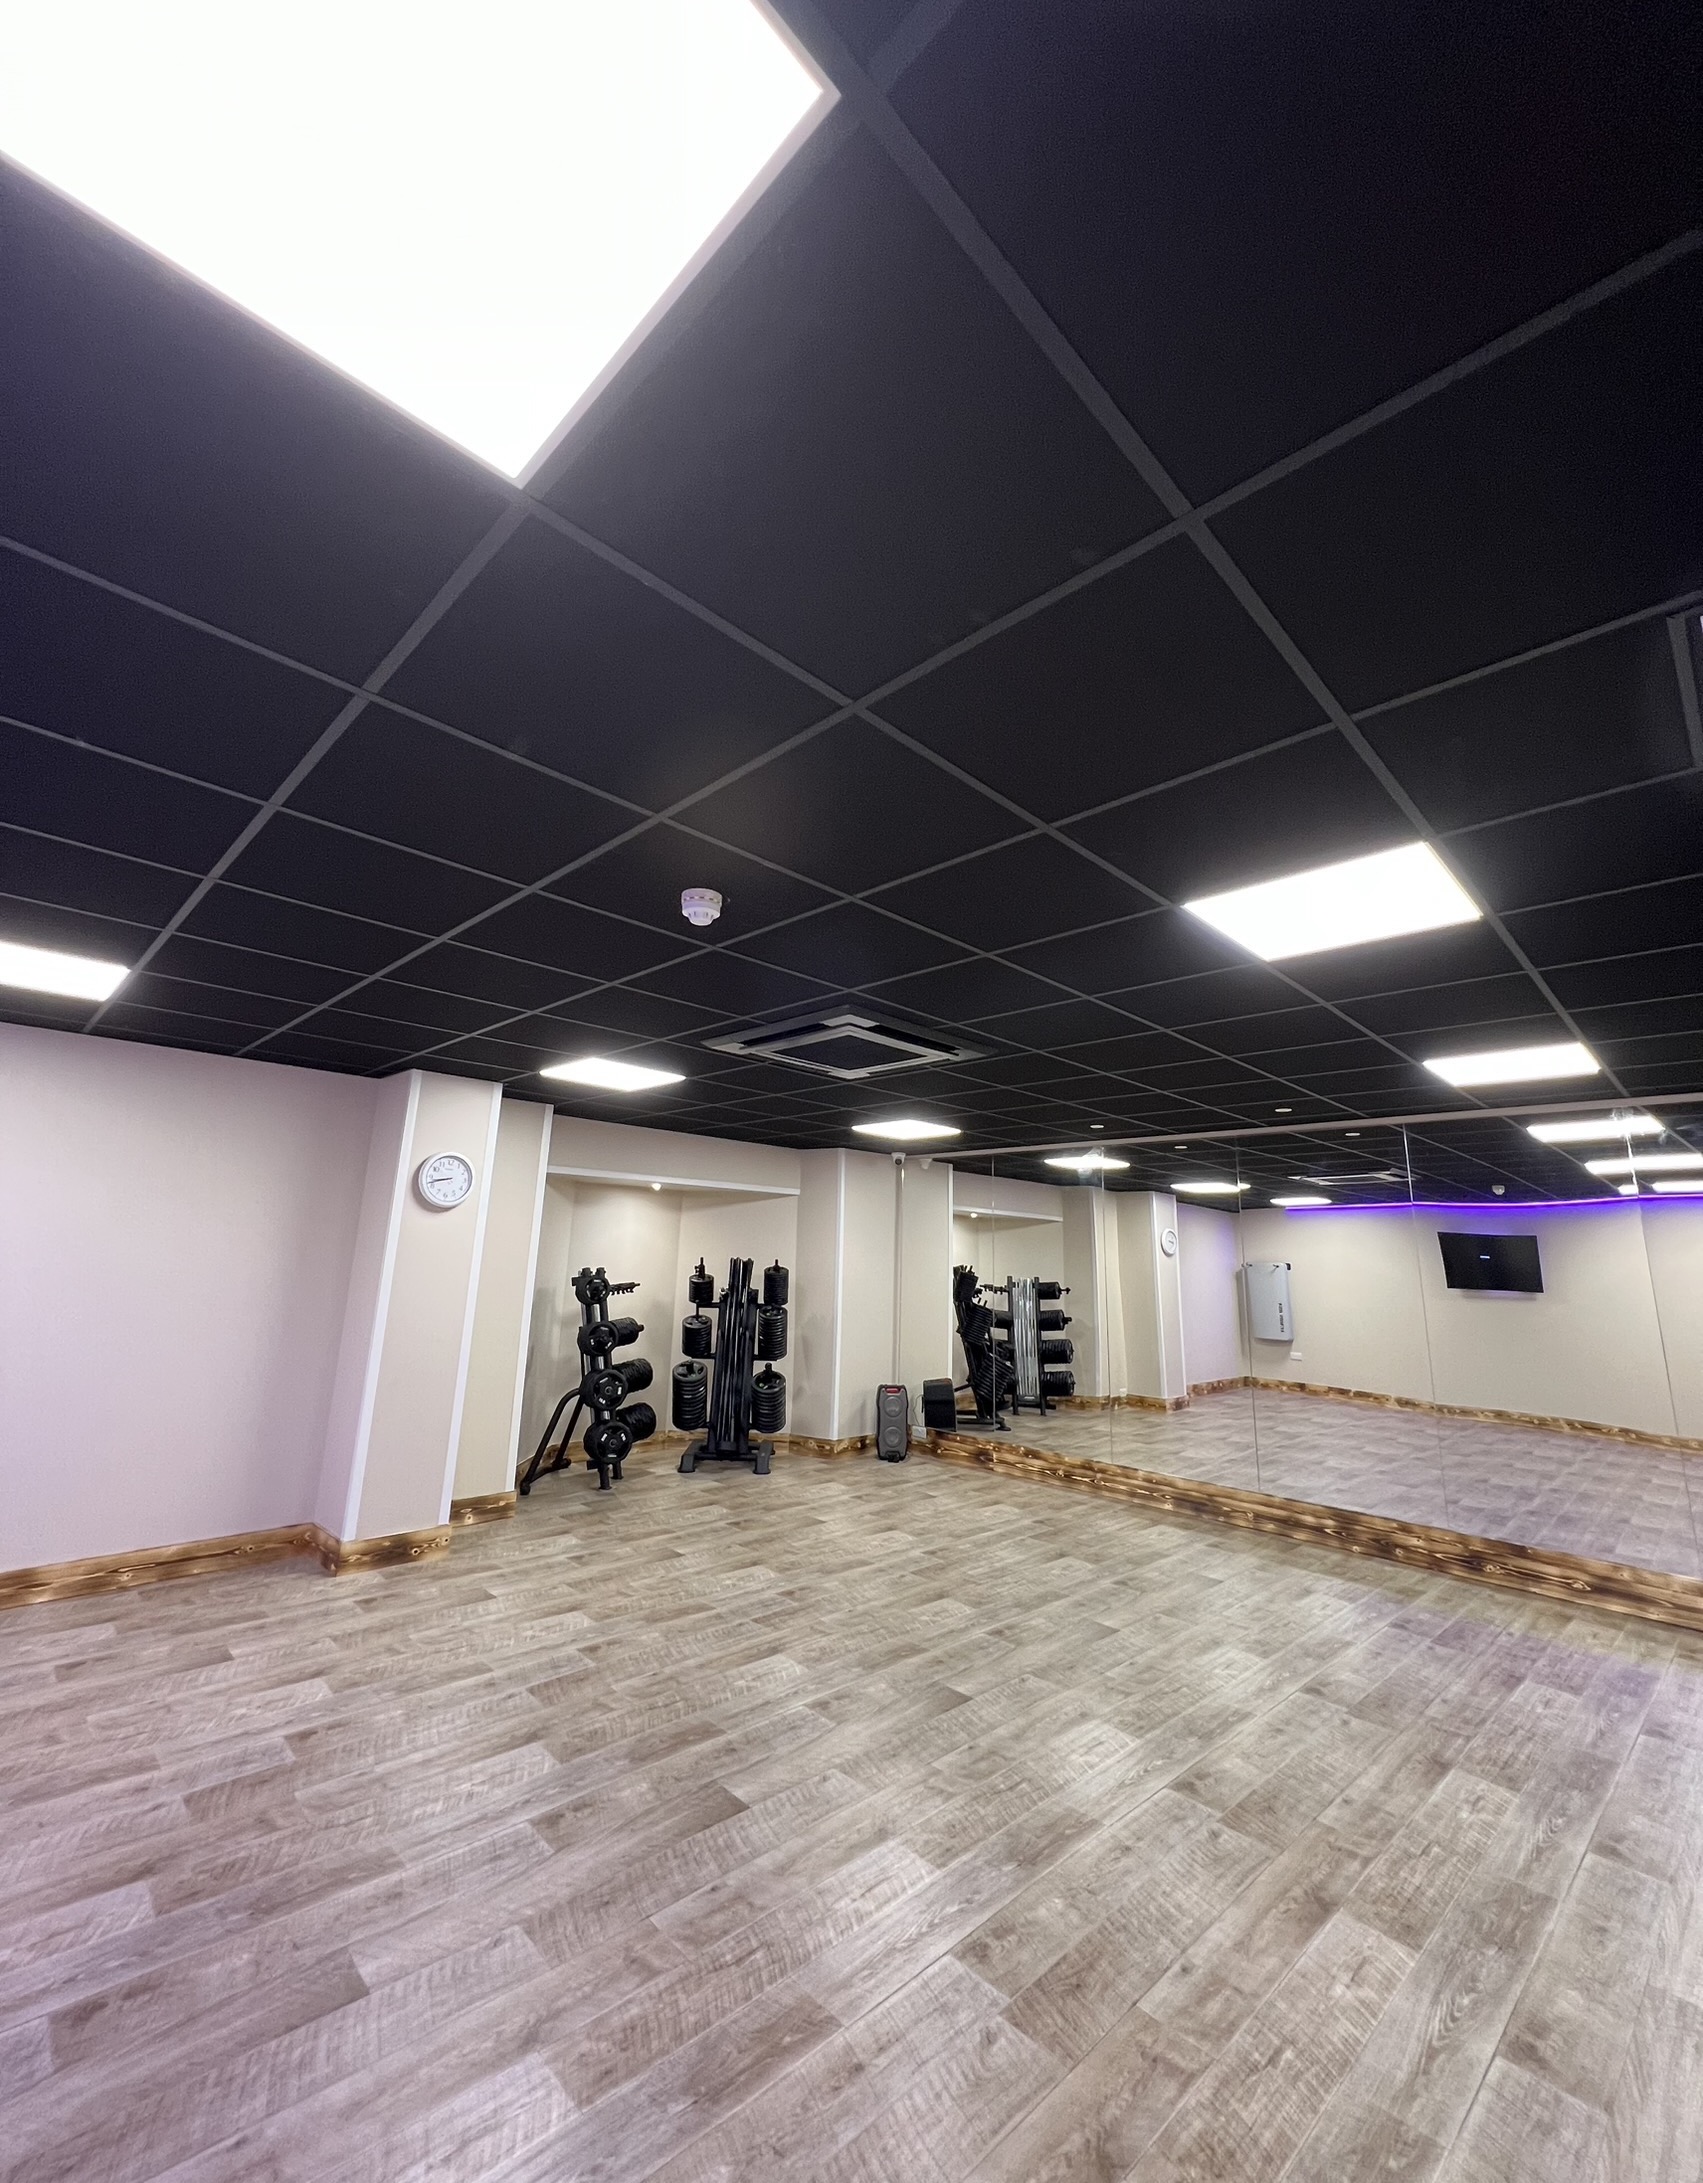 Gym with pannels in the roof replaced with lights